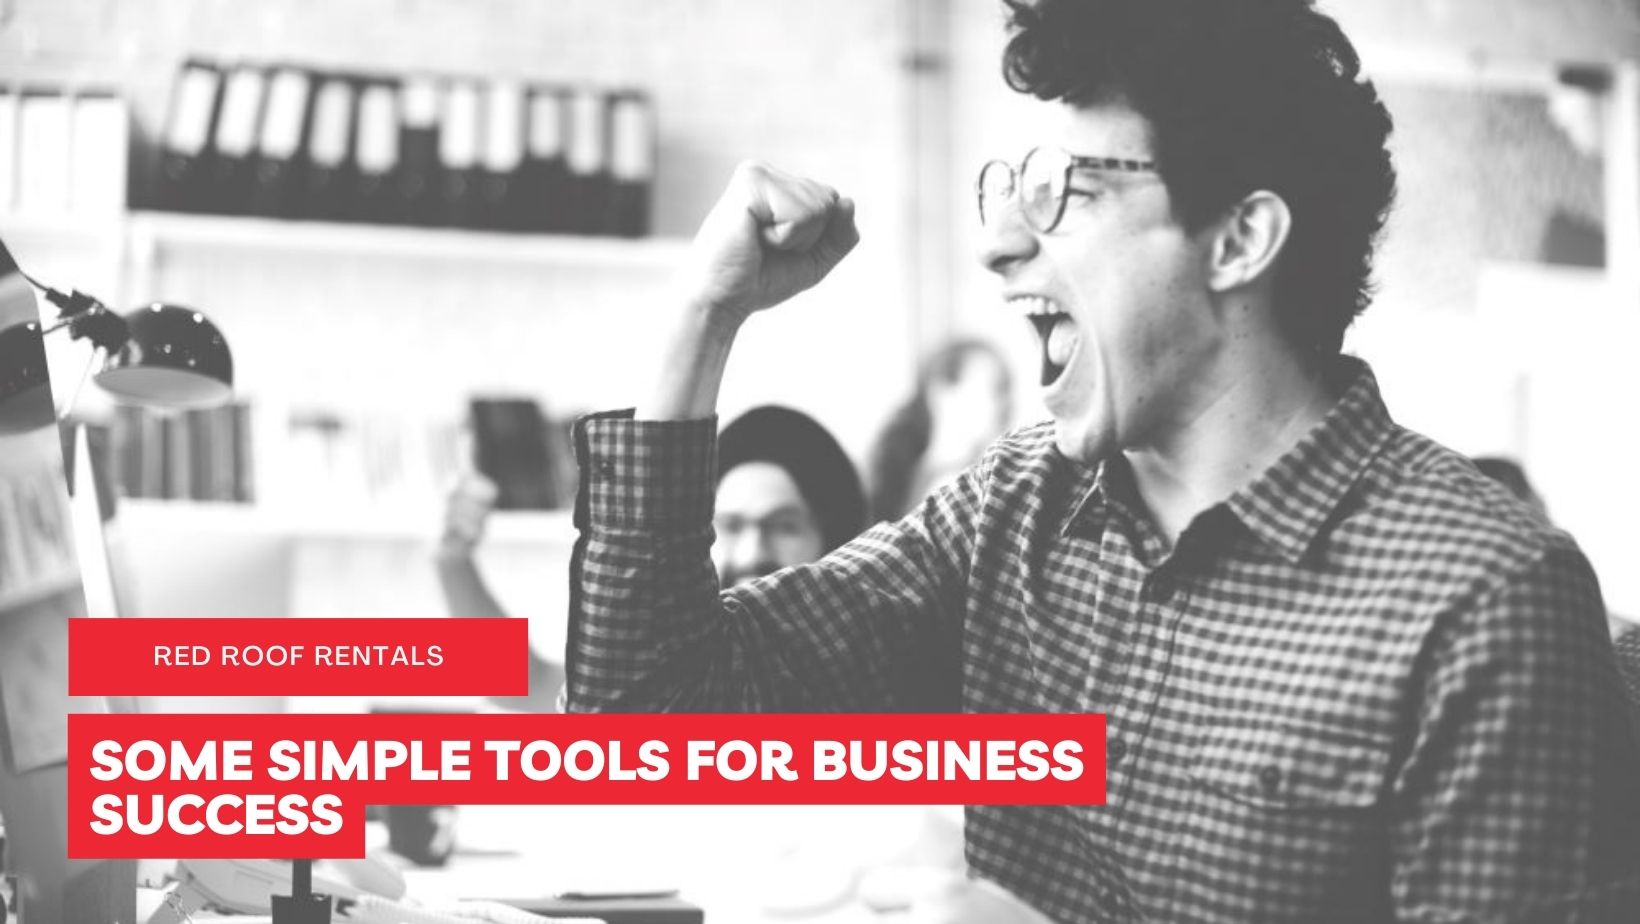 SOME SIMPLE TOOLS FOR BUSINESS SUCCESS